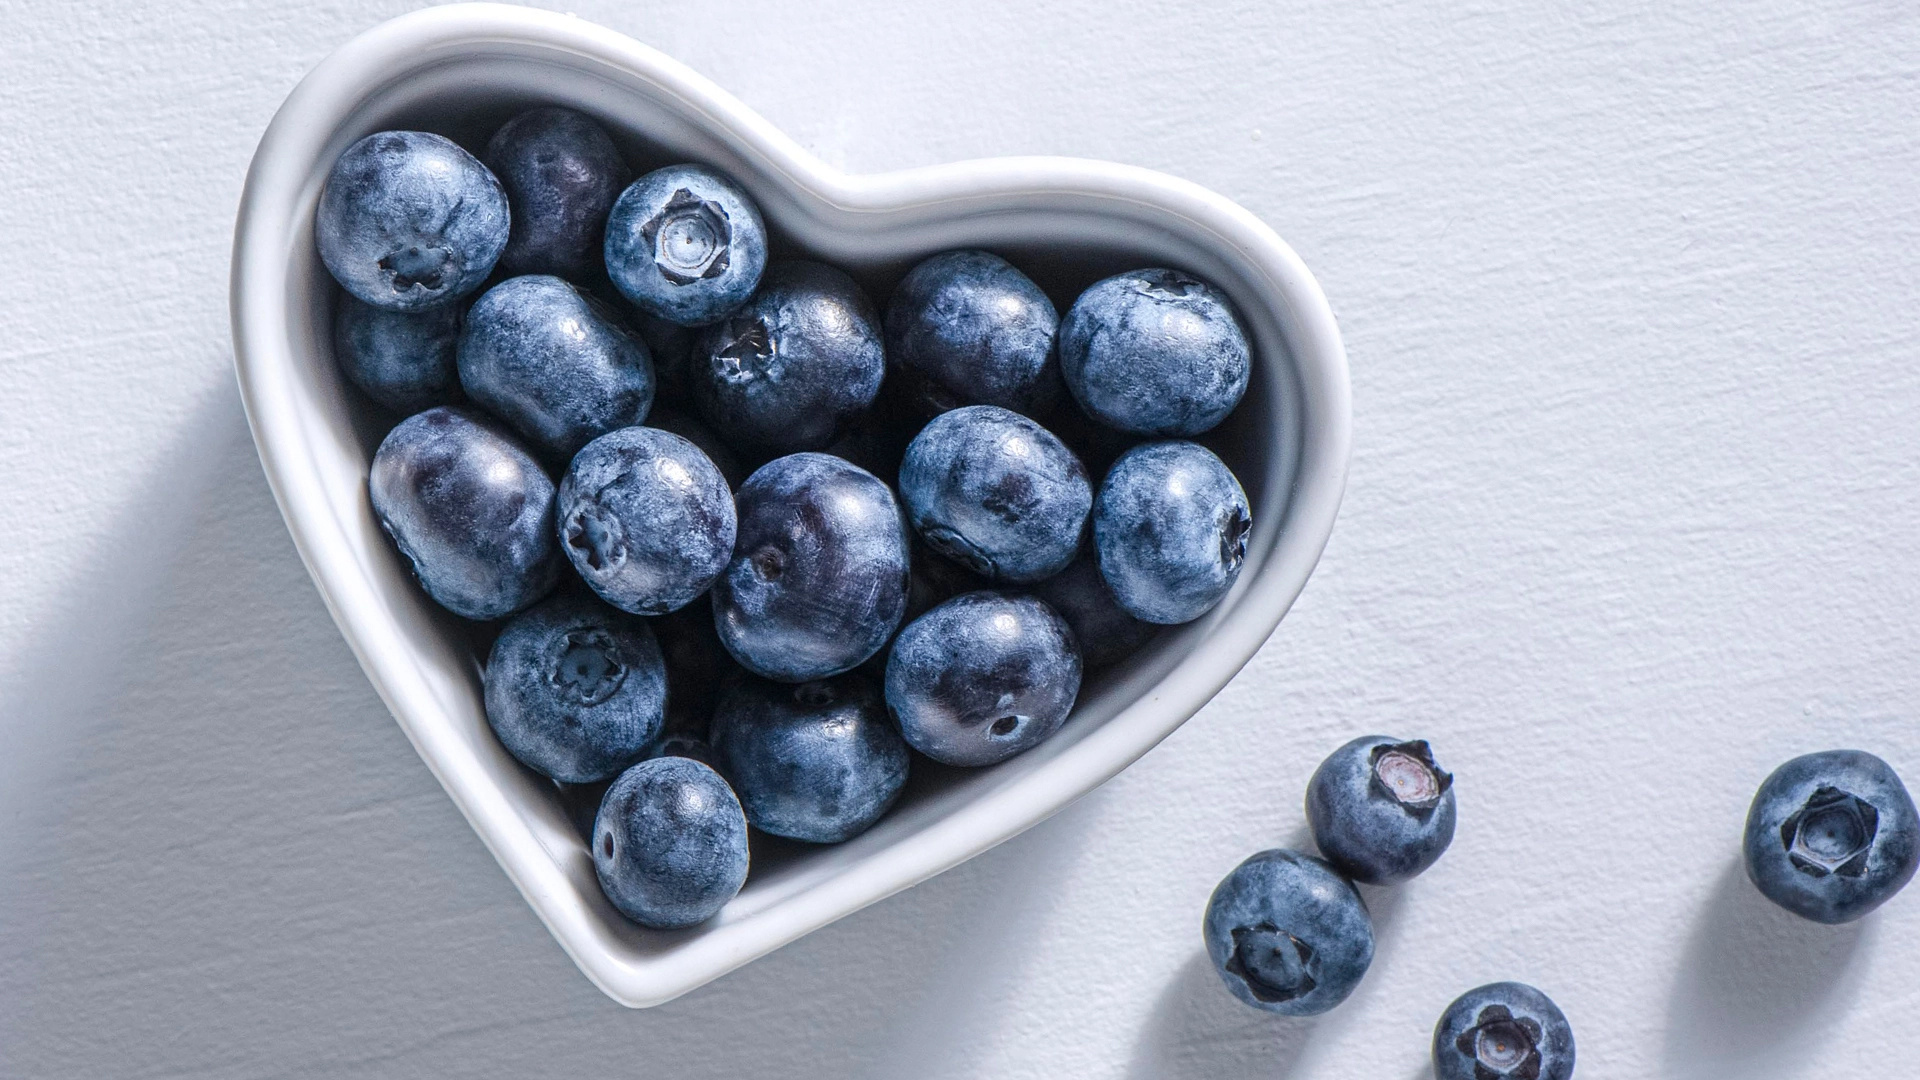 Blueberry health benefits, Nutrient-packed superfood, Antioxidant-rich, Delicious and nutritious, 1920x1080 Full HD Desktop